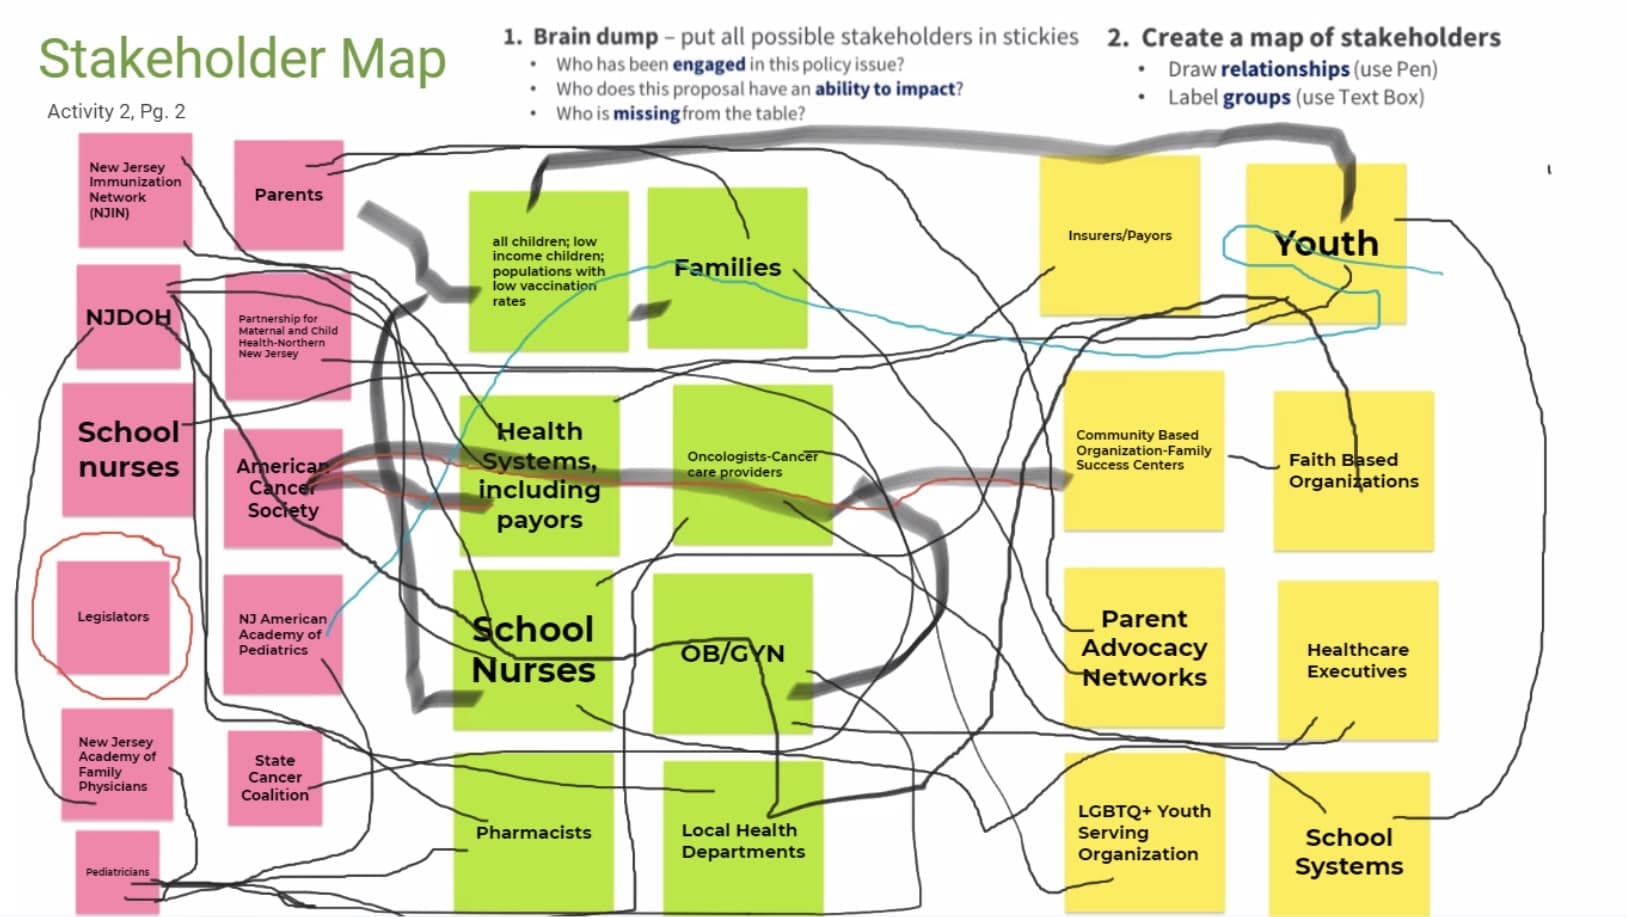 Image of a stakeholder map with the following text: 1. Brain dump - put all possible stakeholders in stickies. Who has been engaged in this policy issue? Who does this proposal have an ability to impact? Who is missing from the table? 2. Create a map of stakeholders. Draw relationships (use Pen). Label groups (use Text Box). Stakeholders in the school system: New Jersey Immunization Network, New Jersey Department of Health, school nurses, legislators, New Jersey Academy of Family Physicians, pediatricians, parents, Partnership for Maternal and Child Health-Northern New Jersey, American Cancer Society, New Jersey American Academy of Pediatrics, and the state cancer coalition. Stakeholders in the health system: all children, low income children, populations with low vaccination rates, health systems including payors, school nurses, pharmacists, families, oncologists (cancer care providers), obstetricians and gynecologists, and local health departments. Stakeholders in the community: insurers/payors, community-based organization-Family Success Centers, parent advocacy networks, LGBTQ+ youth serving organization, youth/faith-based organizations, health care executives, and school systems.